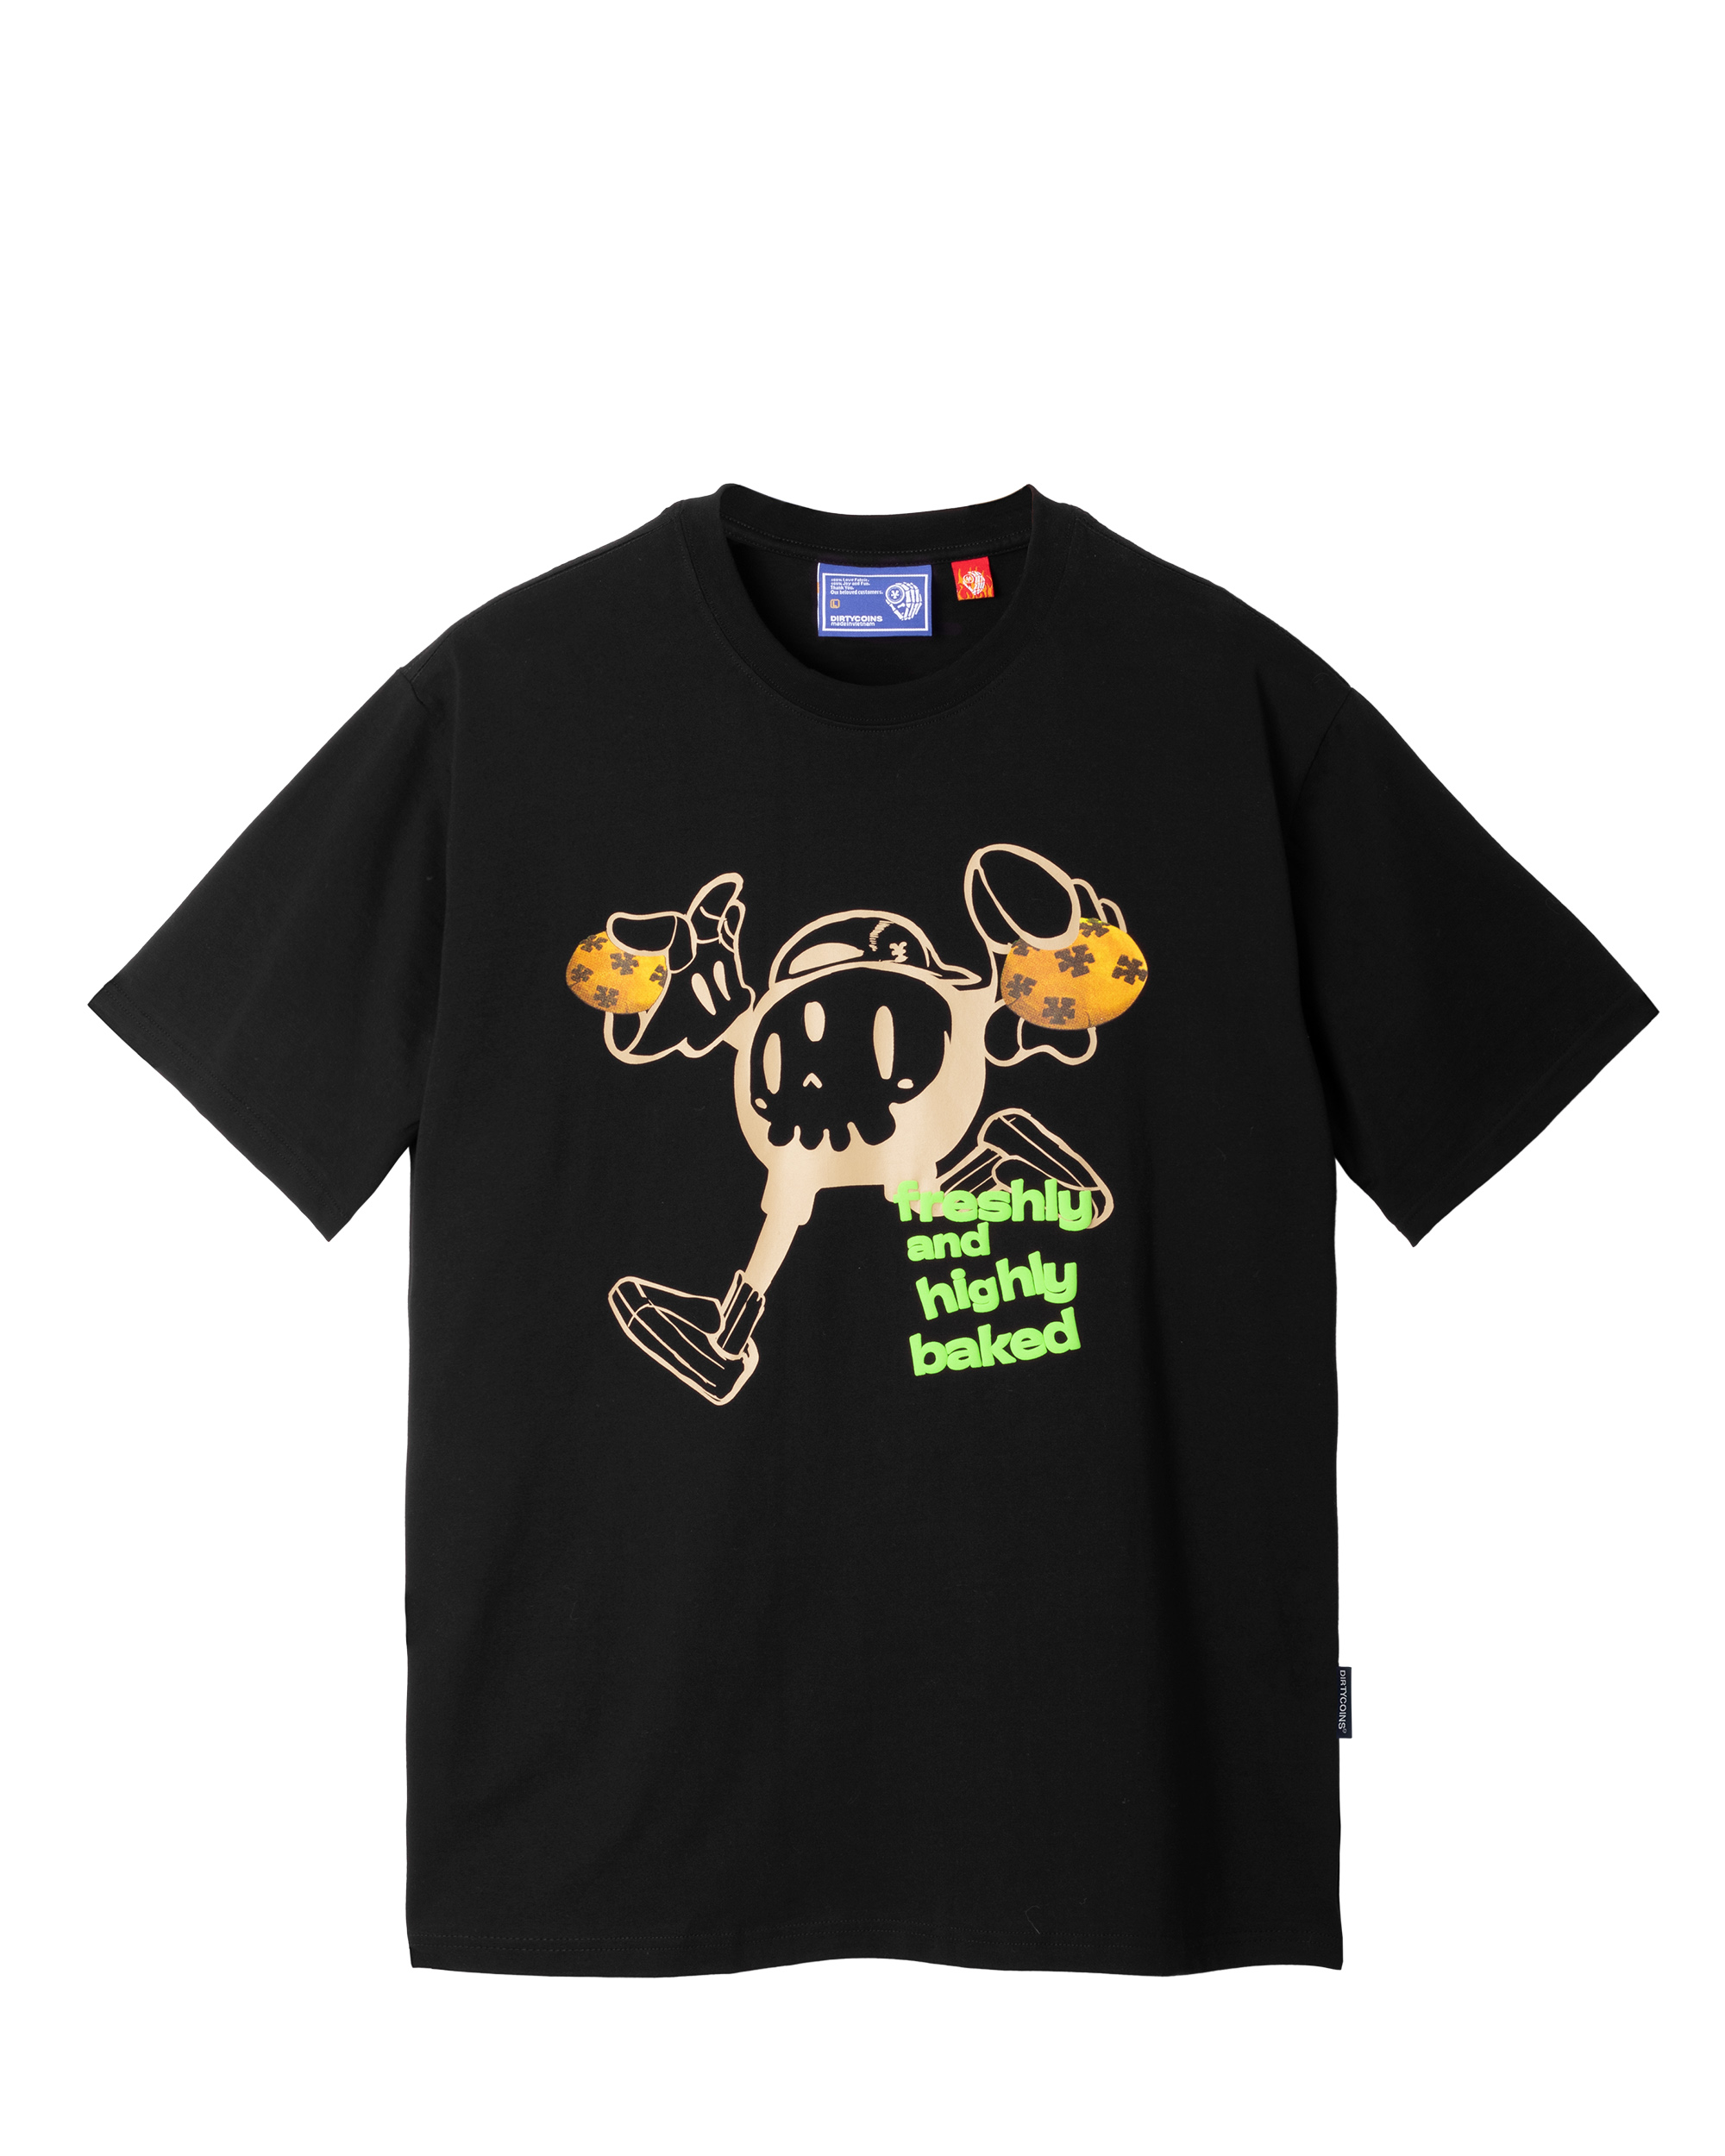 DIRTYCOINS X LILWUYN COLLECTION 2021 - DirtyCoins | VIETNAMESE ...